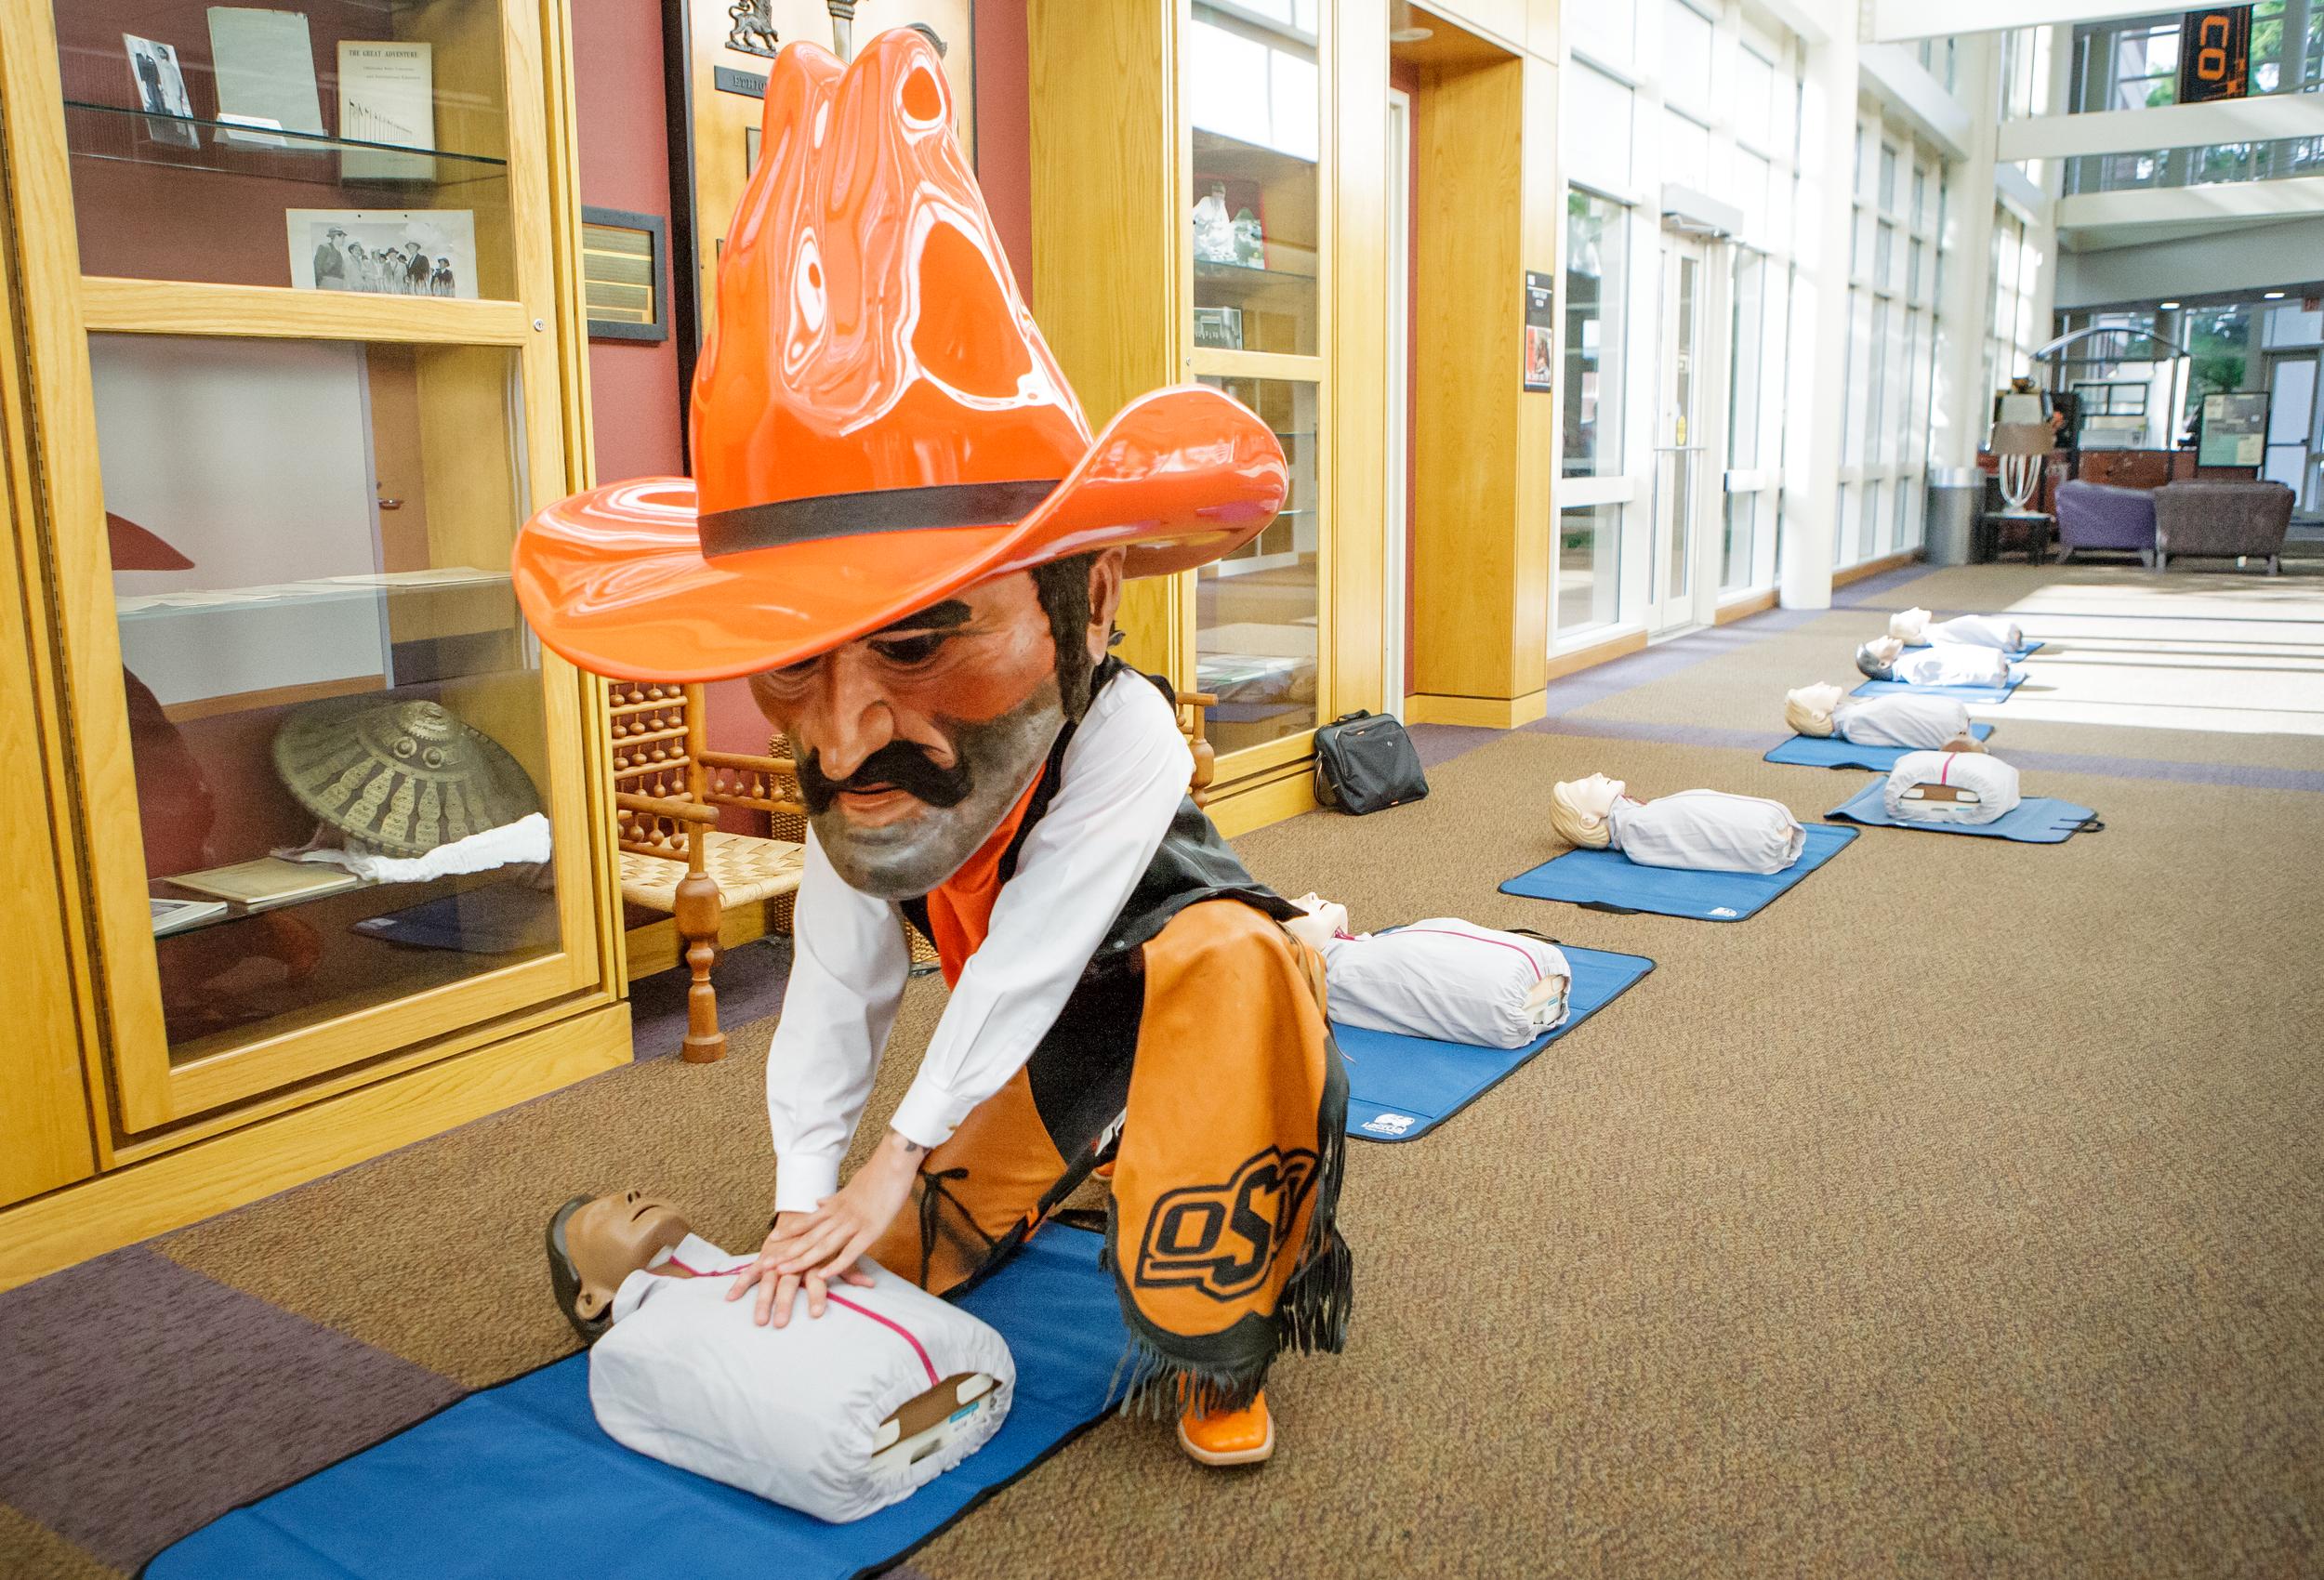 Pistol Pete demonstrates how to perform CPR using a dummy on the ground